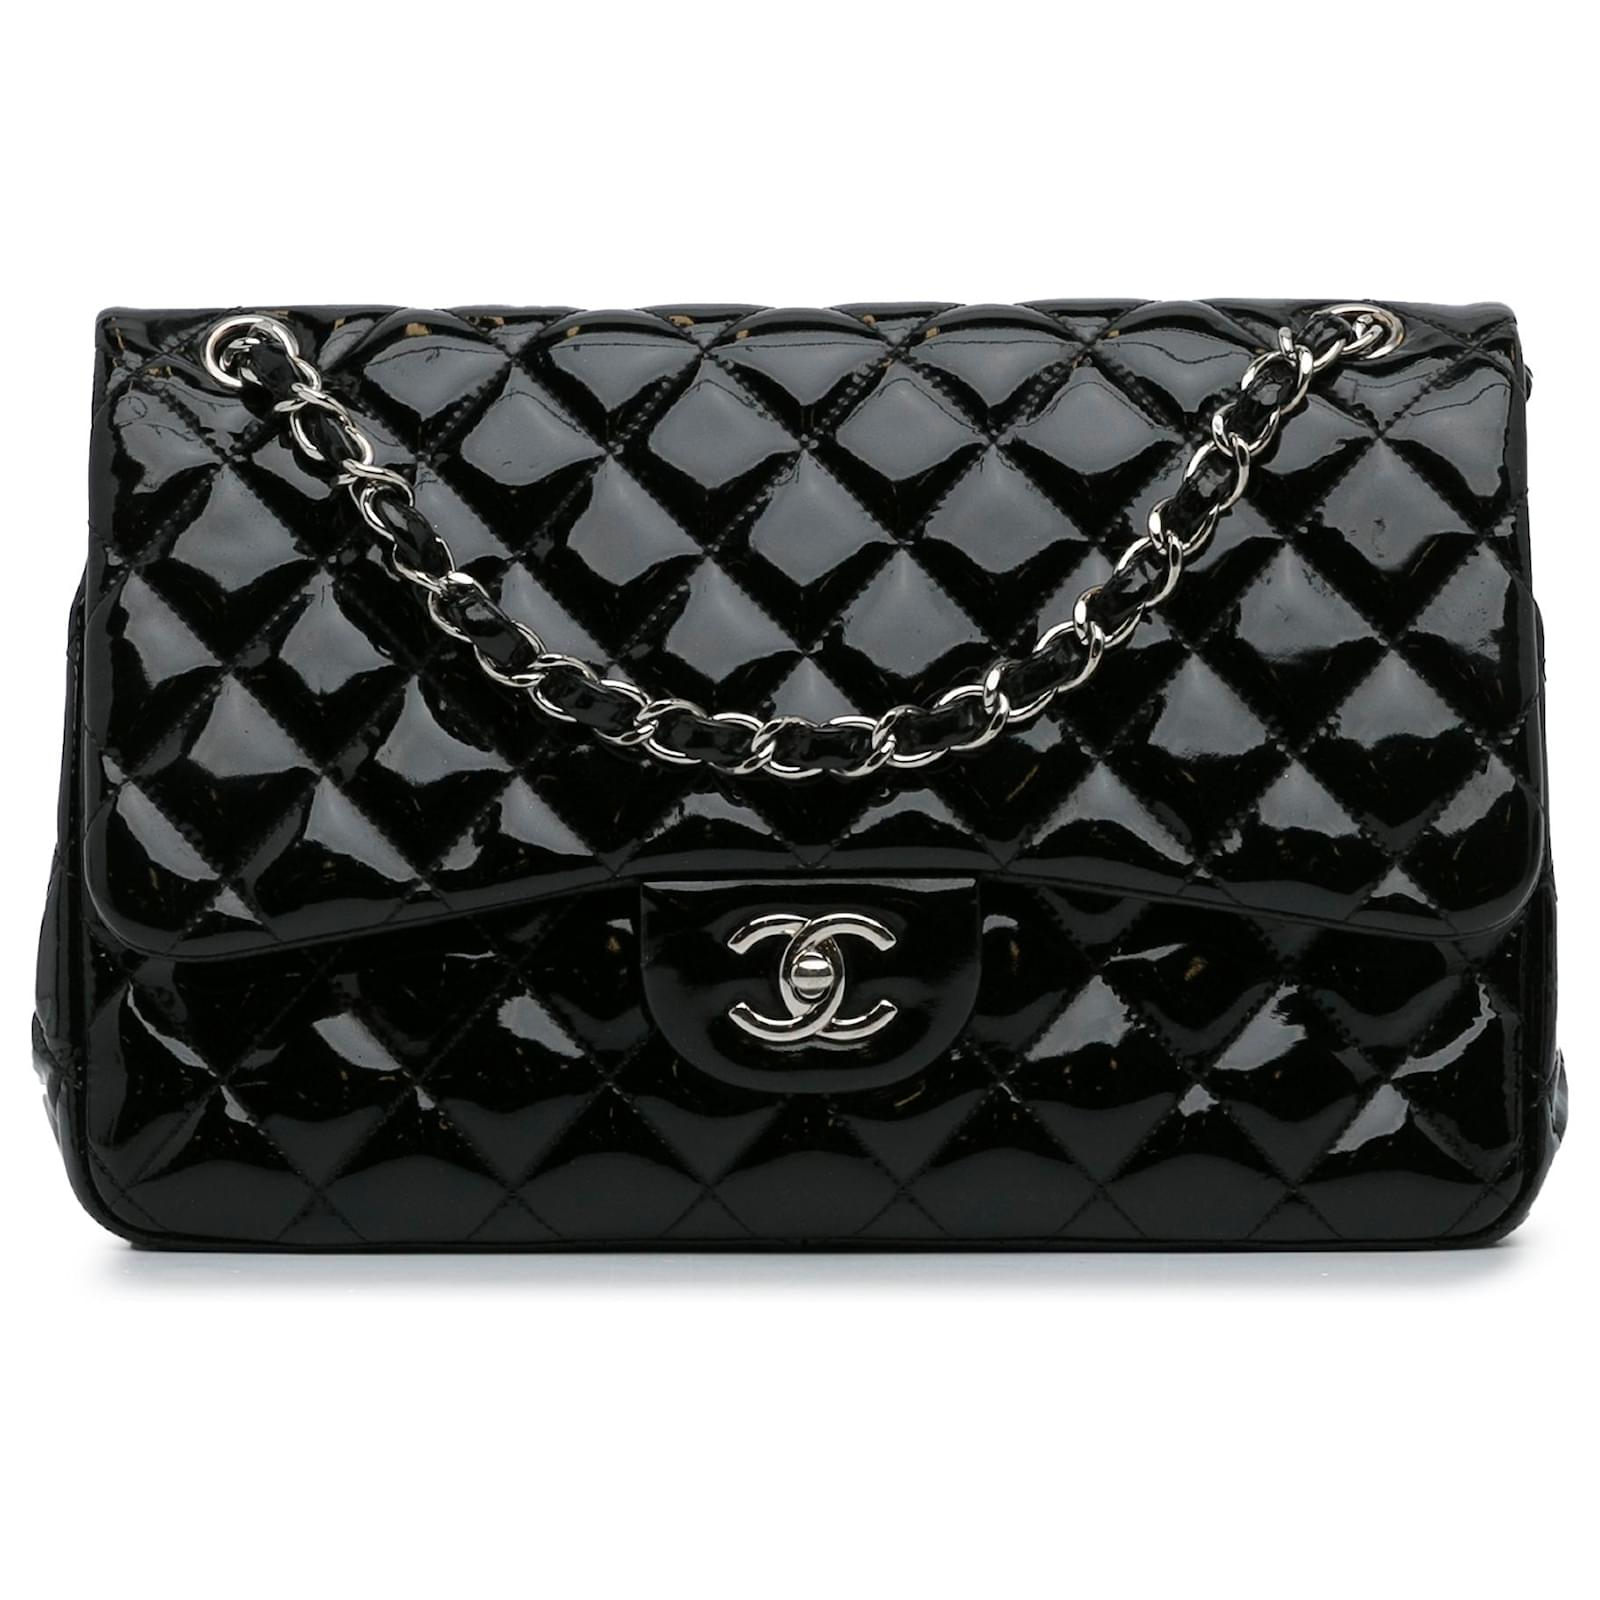 Chanel Black Jumbo Classic Patent lined Flap Leather Patent